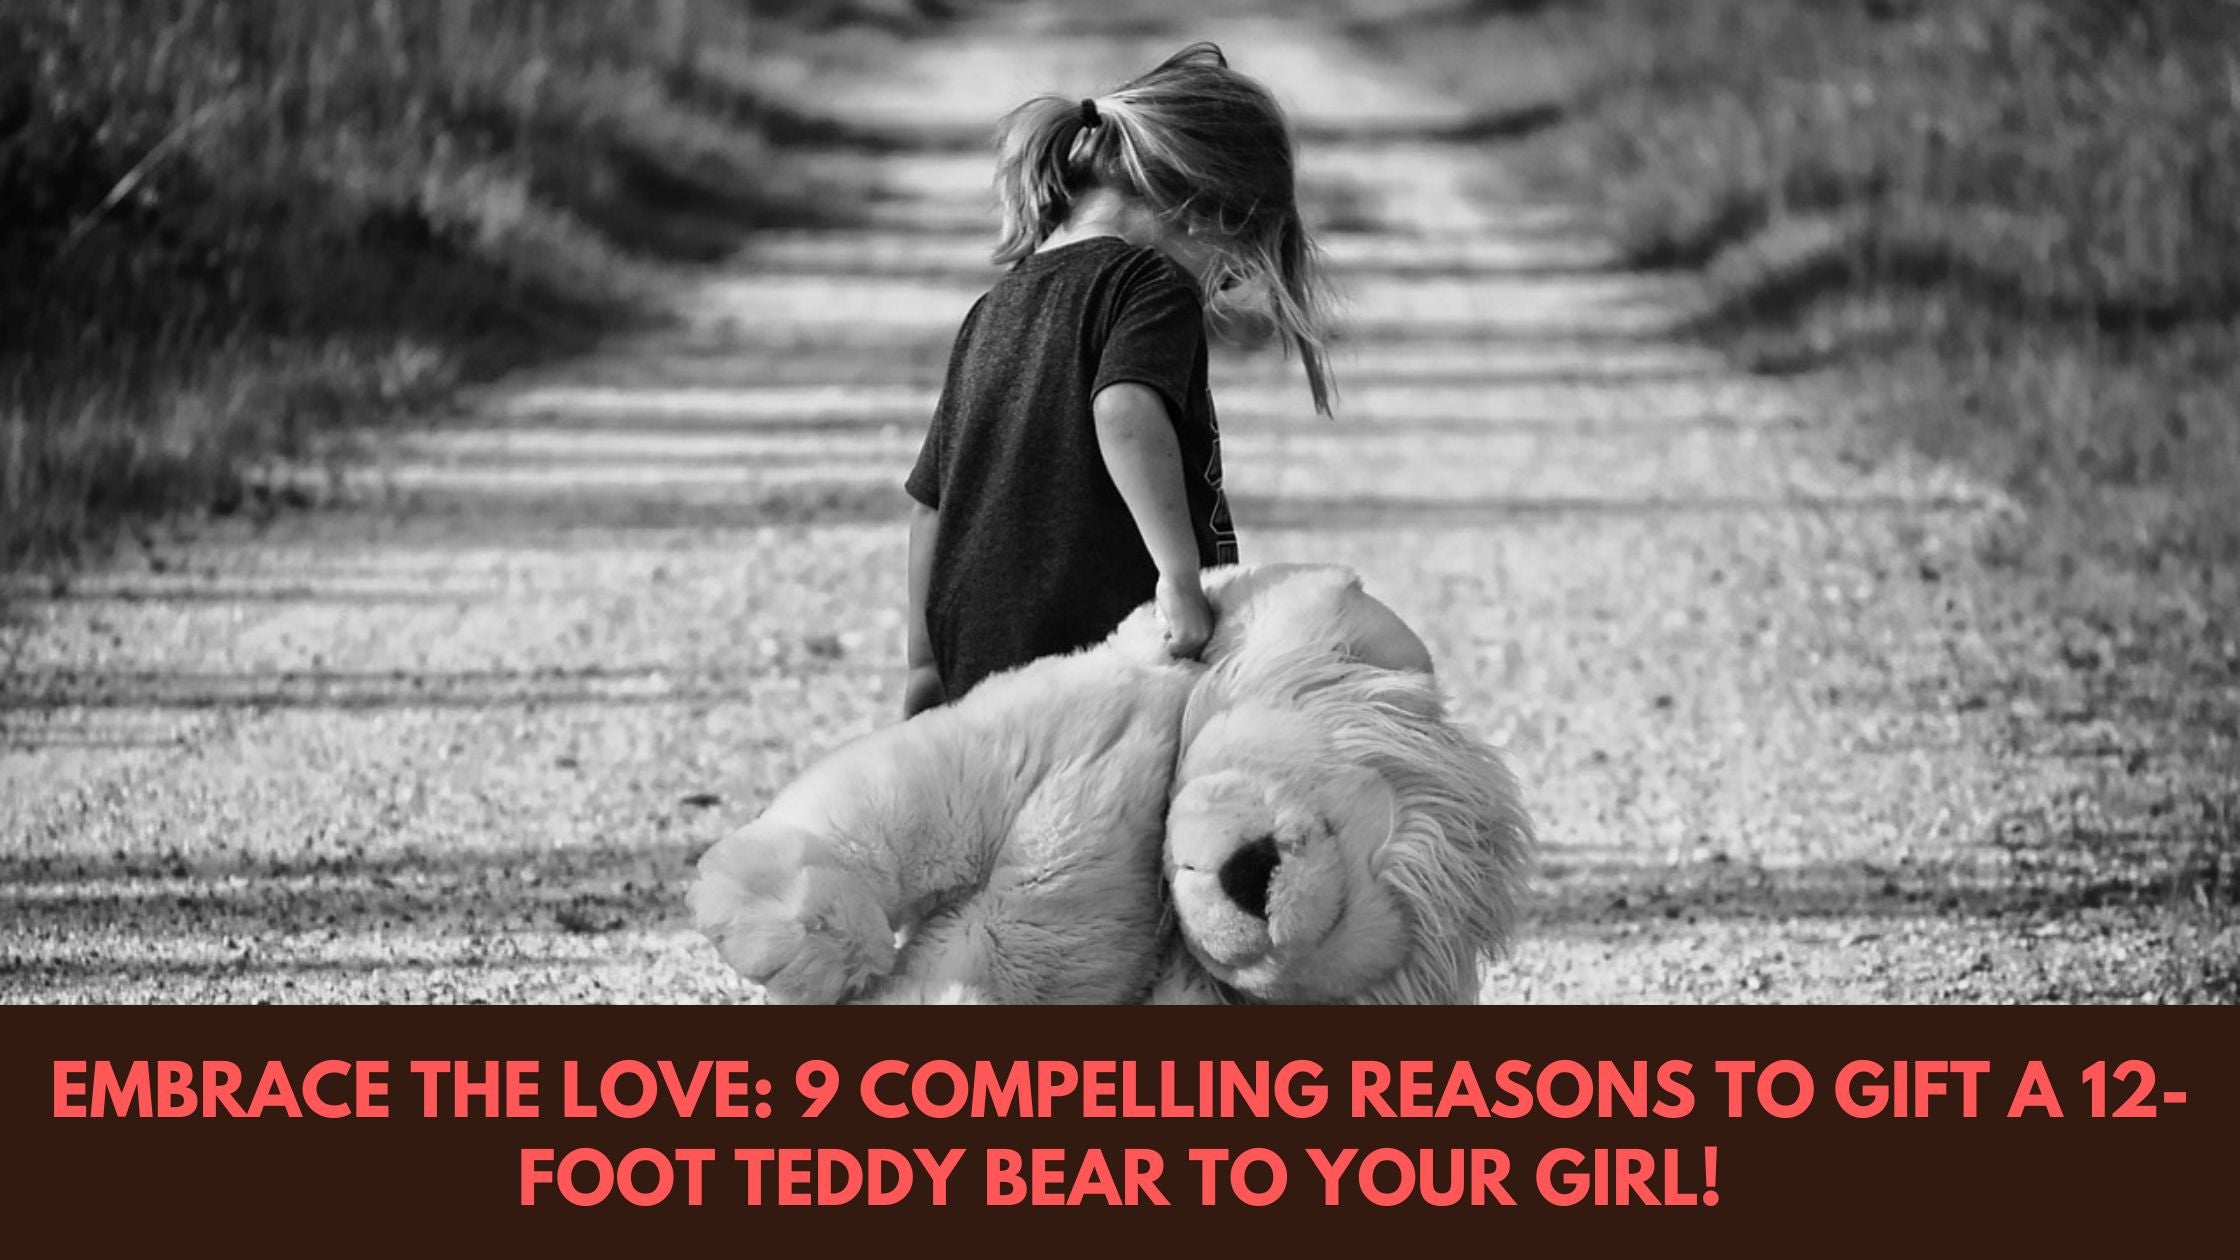 Embrace the Love: 9 Compelling Reasons to Gift a 12-Foot Teddy Bear to Your Girl!